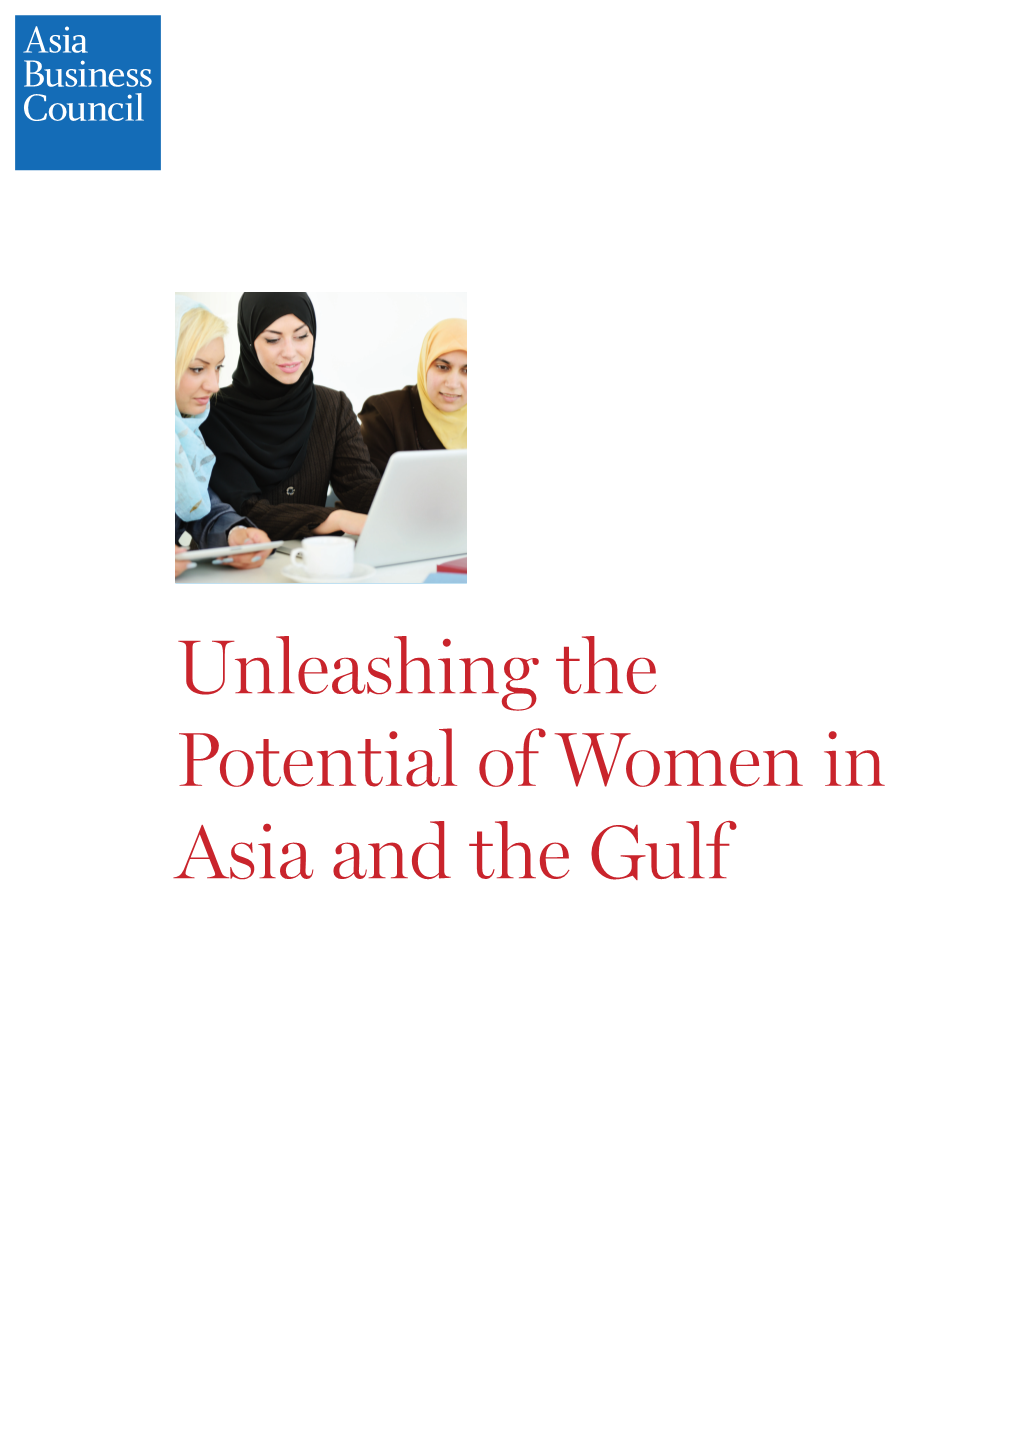 Unleashing the Potential of Women in Asia and the Gulf September 2016 Unleashing the Potential of Women in Asia and the Gulf